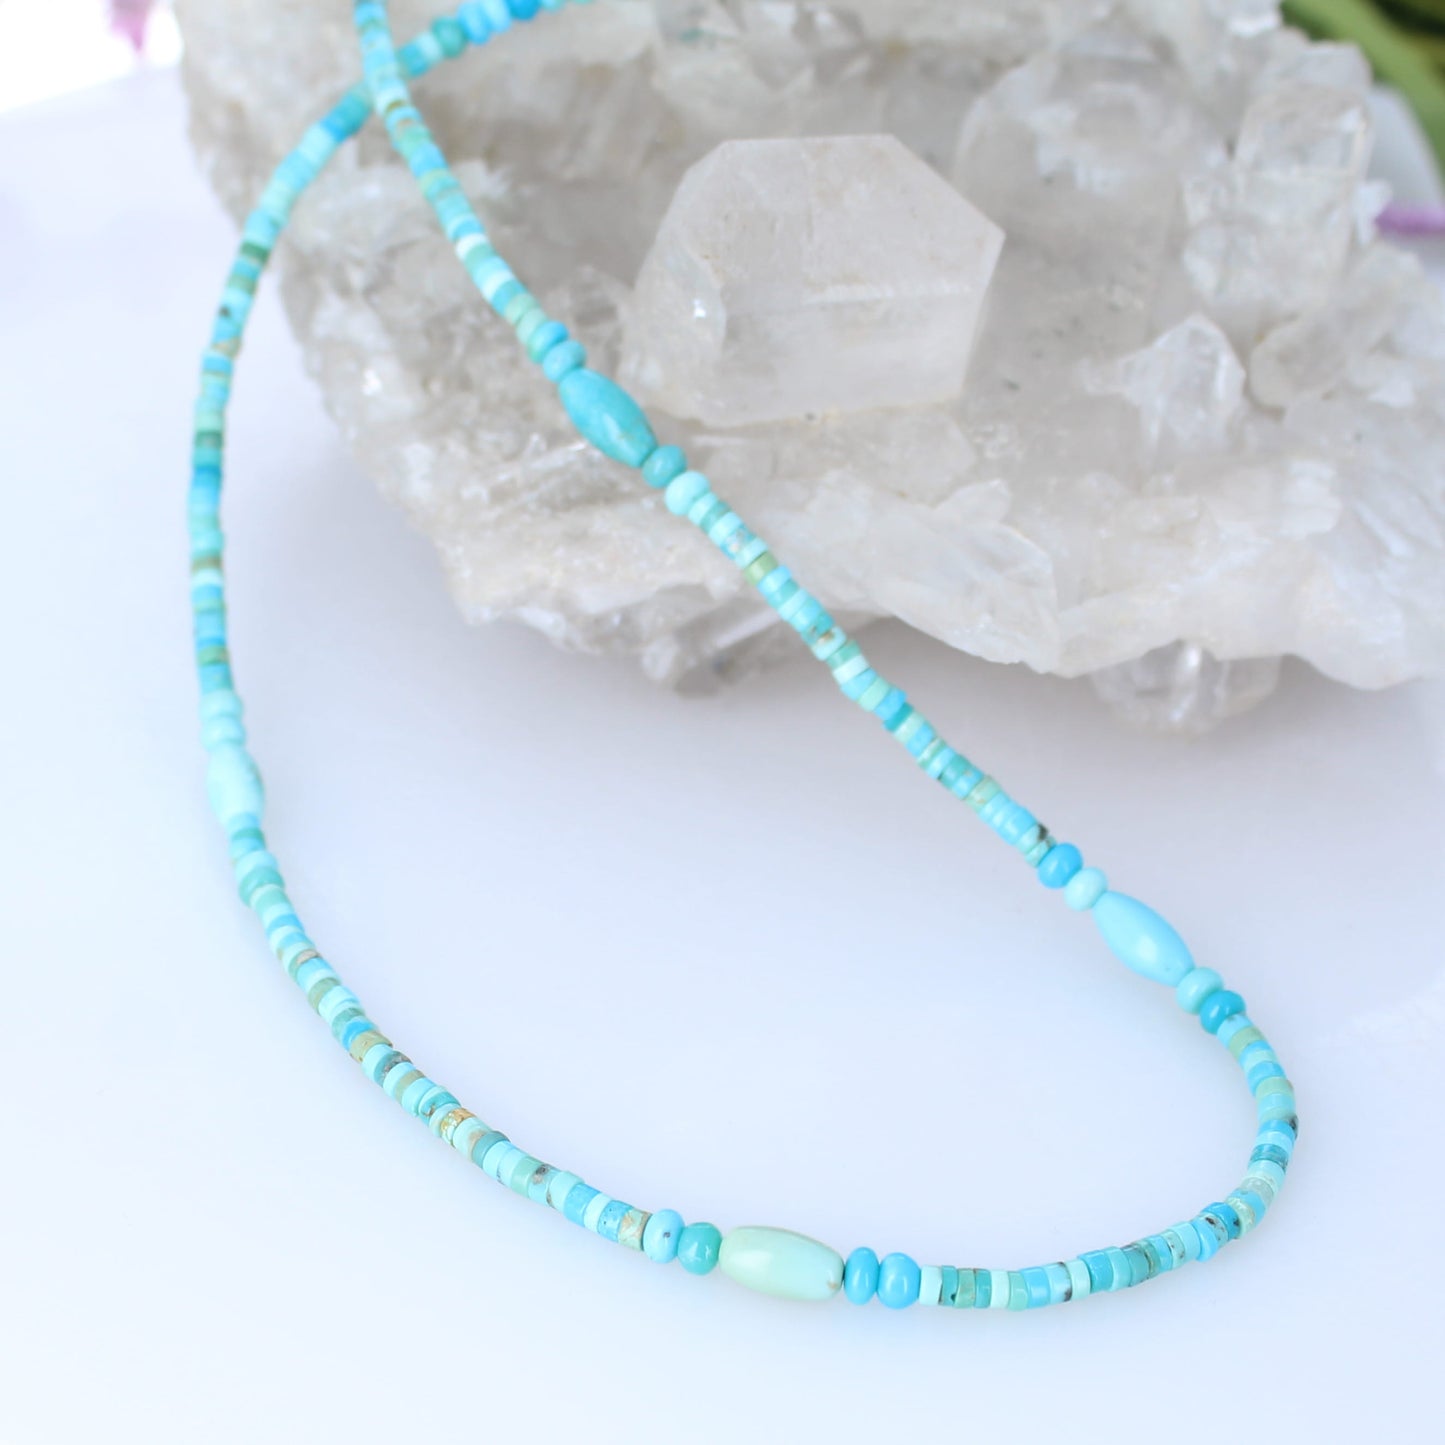 100% Natural Sleeping Beauty Turquoise Necklace Multi Color Sterling